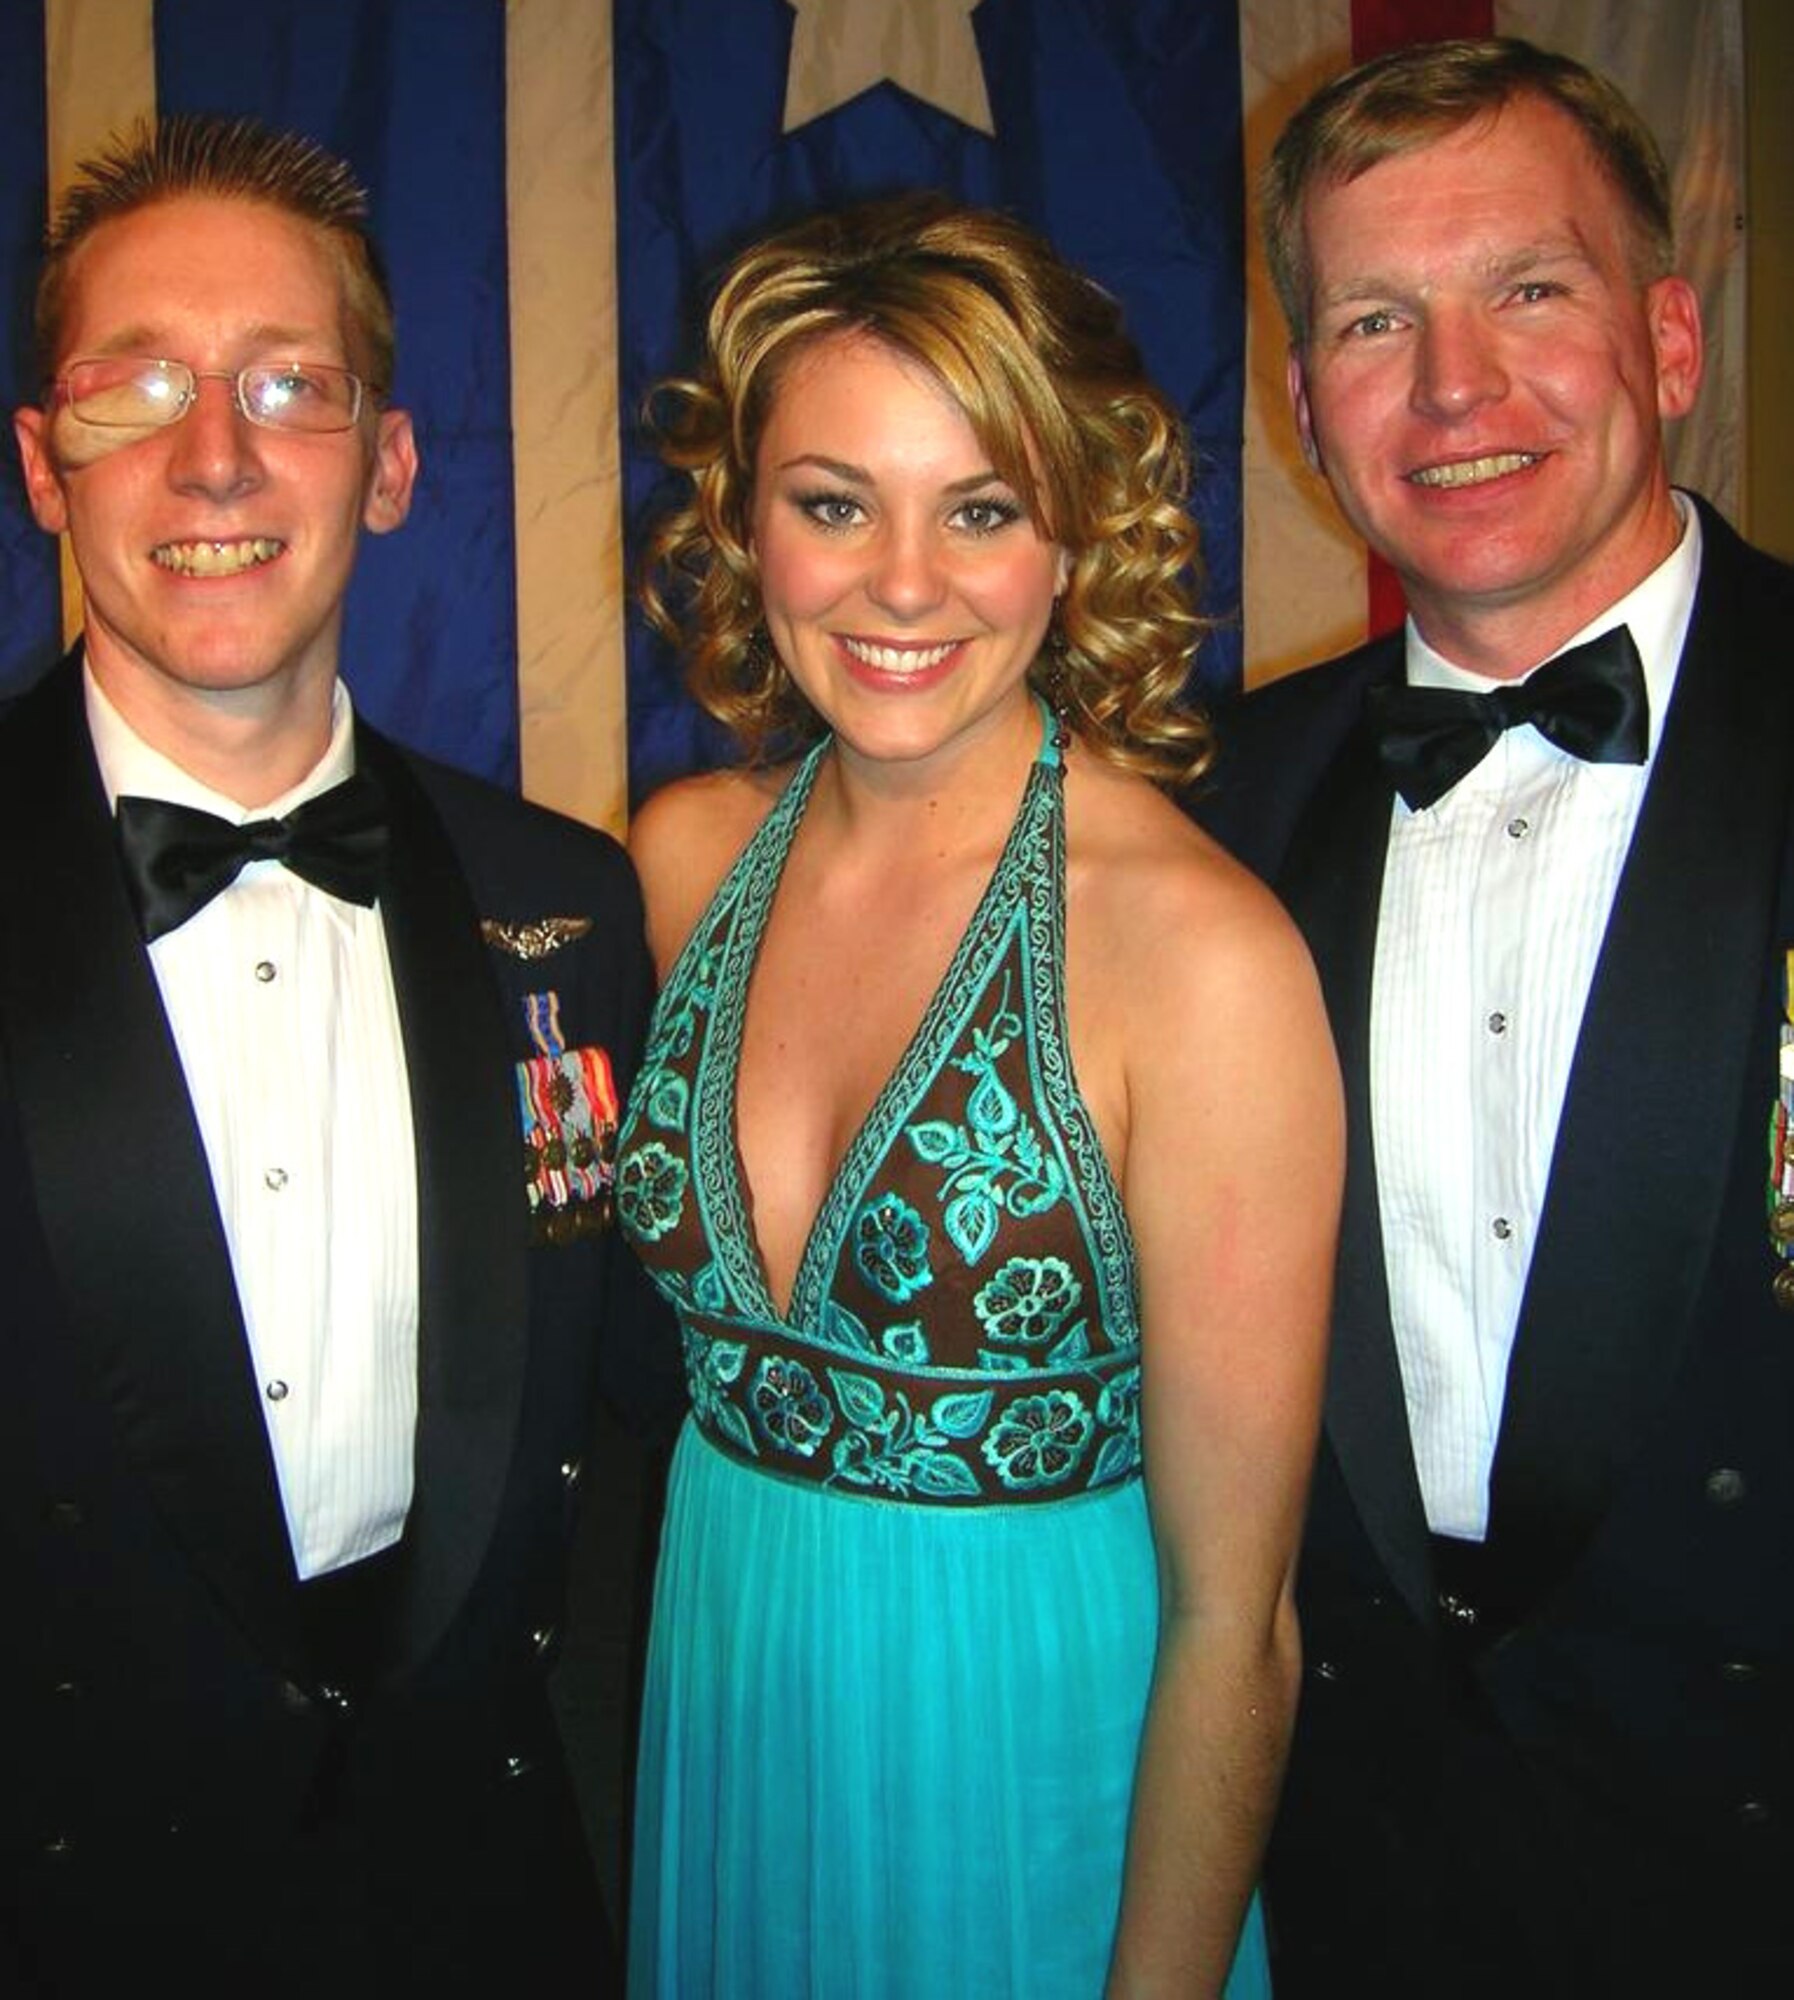 Tech. Sgt. Christian MacKenzie (right) and Staff Sgt. Eric Ezell pose with Miss America 2007 Lauren Nelson at the USO of Metro Washington Area Annual Awards Banquet earlier this year. Sergeant Ezell was the Air Force honoree during the event because of wounds he received in Iraq. Sergeant MacKenzie attended as his special guest because of the support he provided Sergeant Ezell during his recovery at Walter Reed Army Medical Center in Washington, D.C. (Courtesy photo)